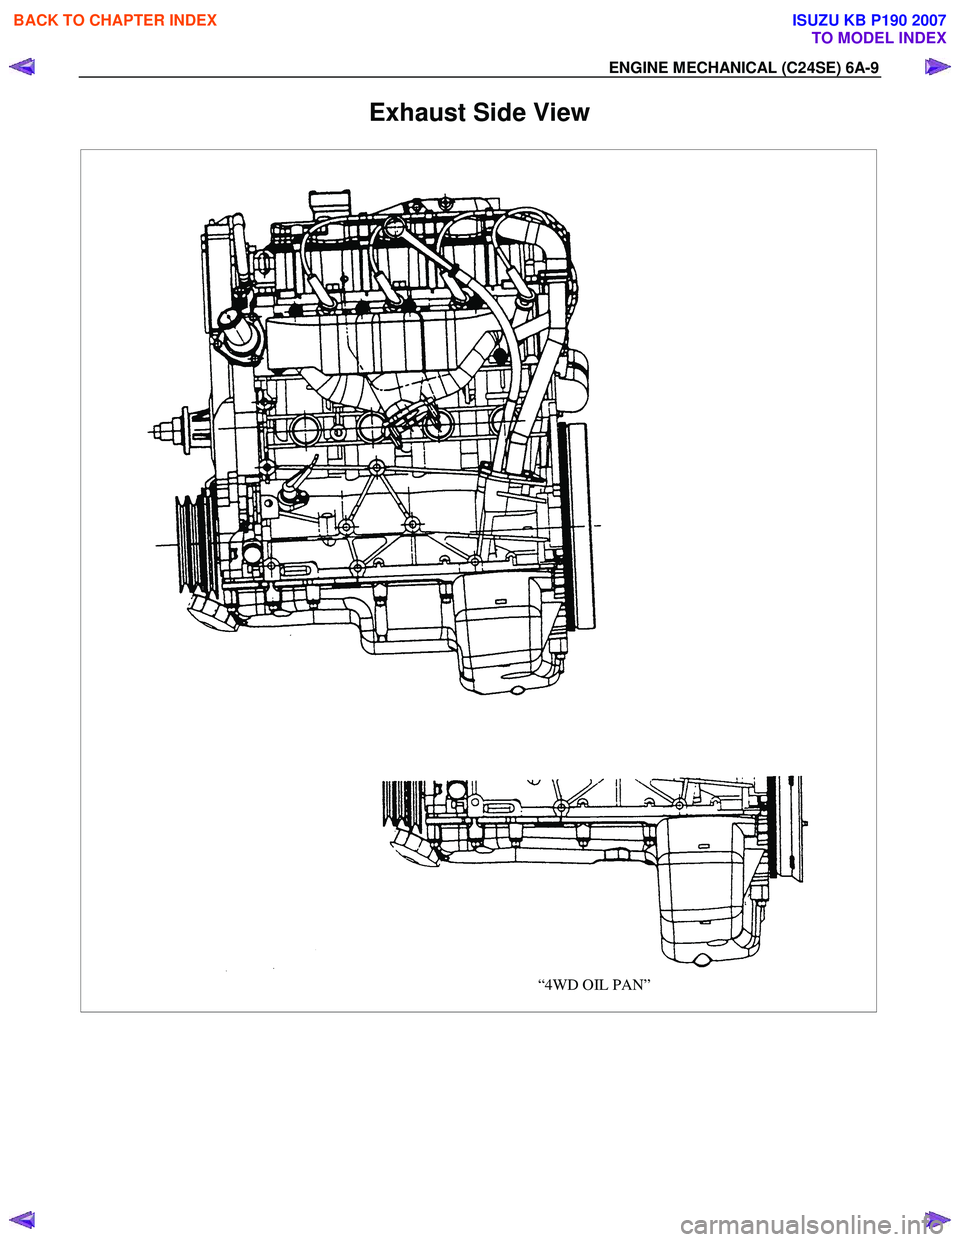 ISUZU KB P190 2007  Workshop Repair Manual ENGINE MECHANICAL (C24SE) 6A-9 
Exhaust Side View 
“4WD OIL PAN”
 
 
BACK TO CHAPTER INDEX
TO MODEL INDEX
ISUZU KB P190 2007 